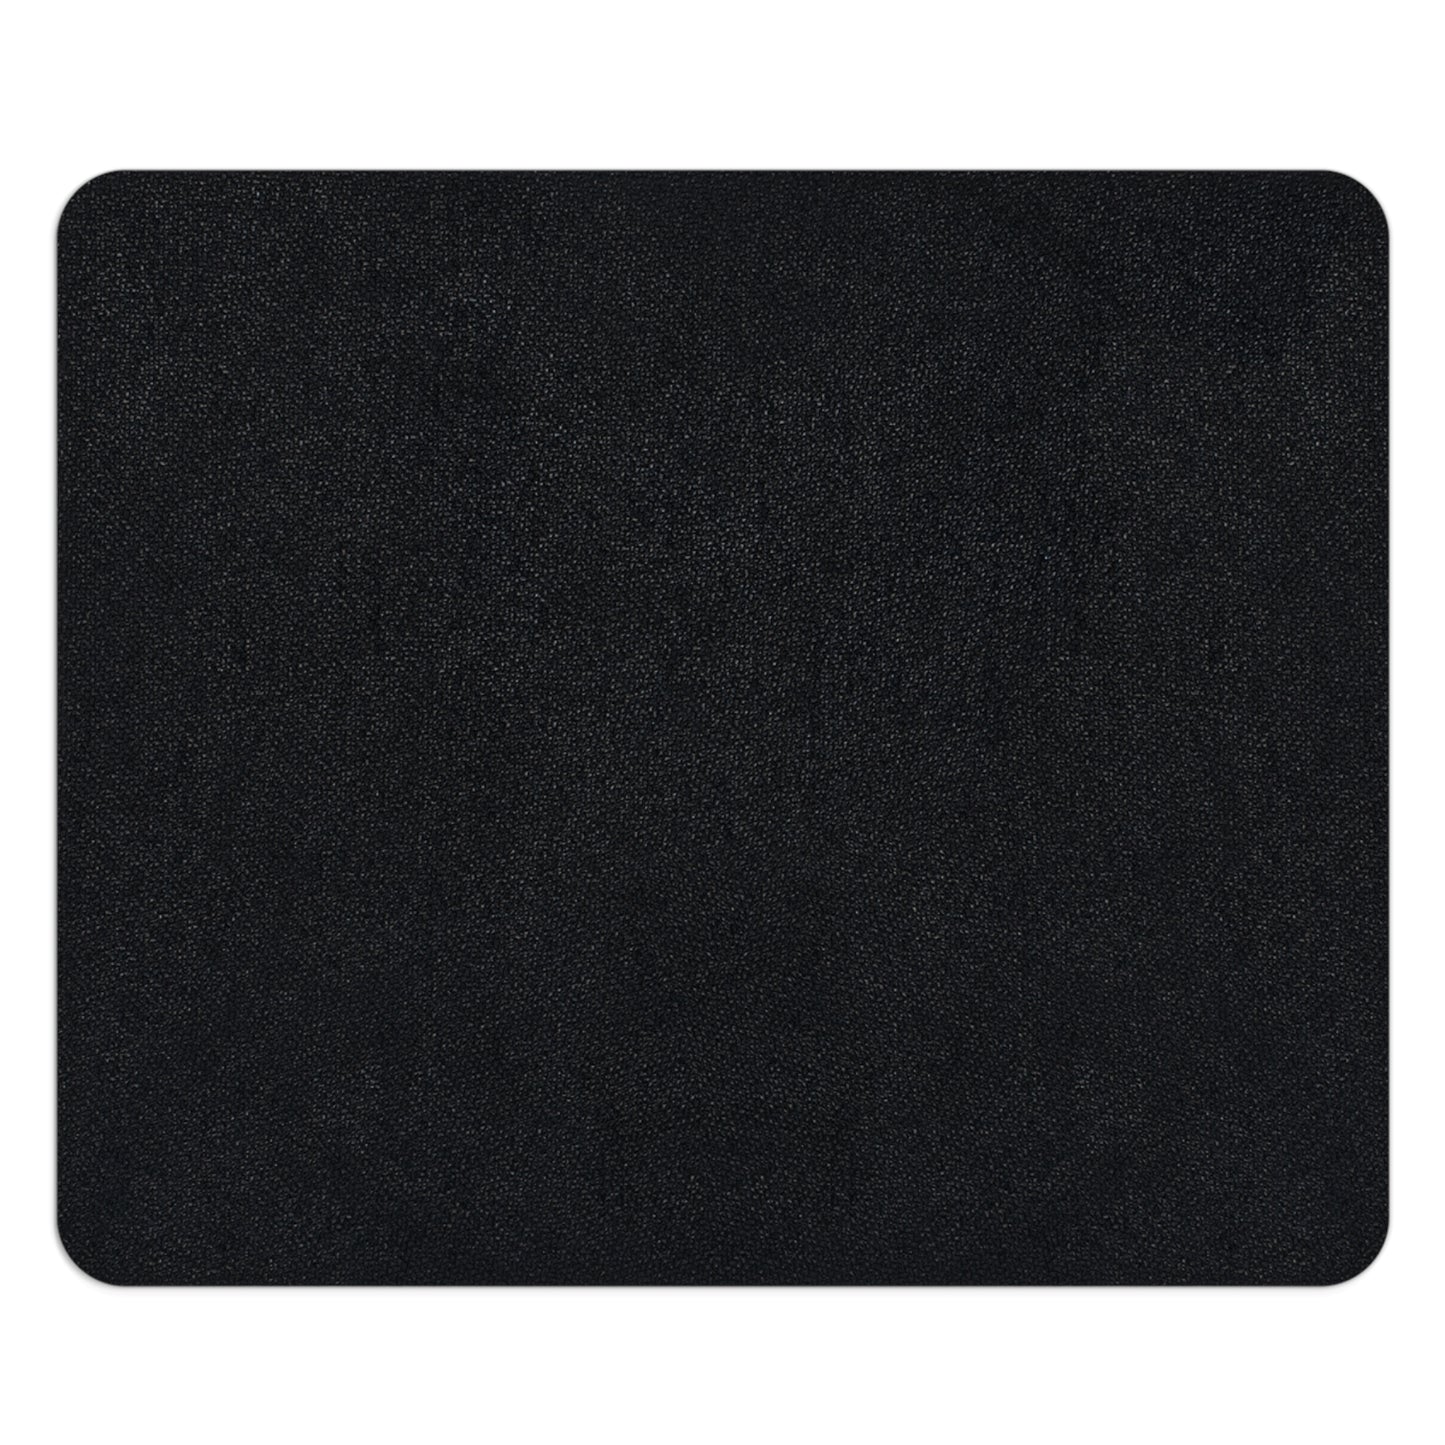 Signature Collection Mousepad in BHM Green